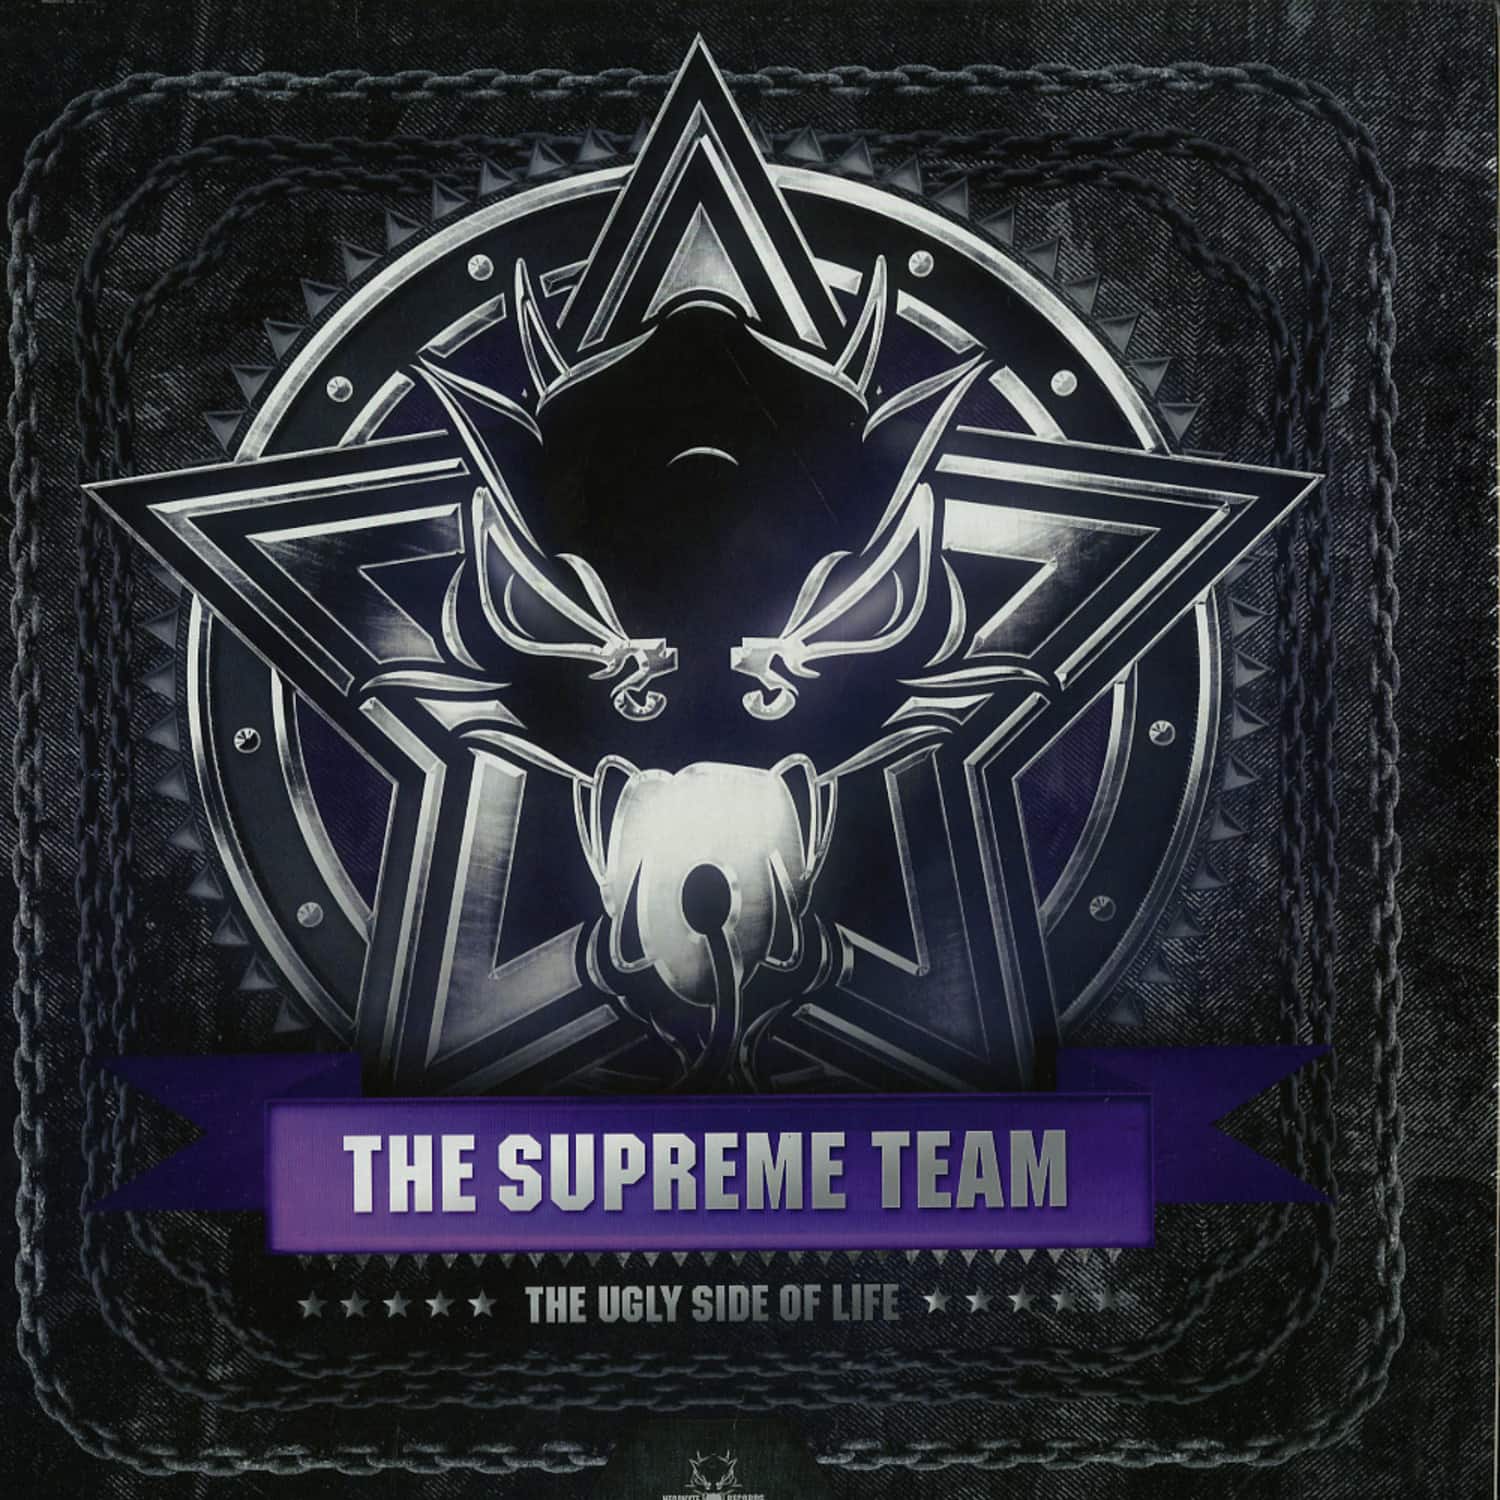 The Supreme Team - THE UGLY SIDE OF LIFE